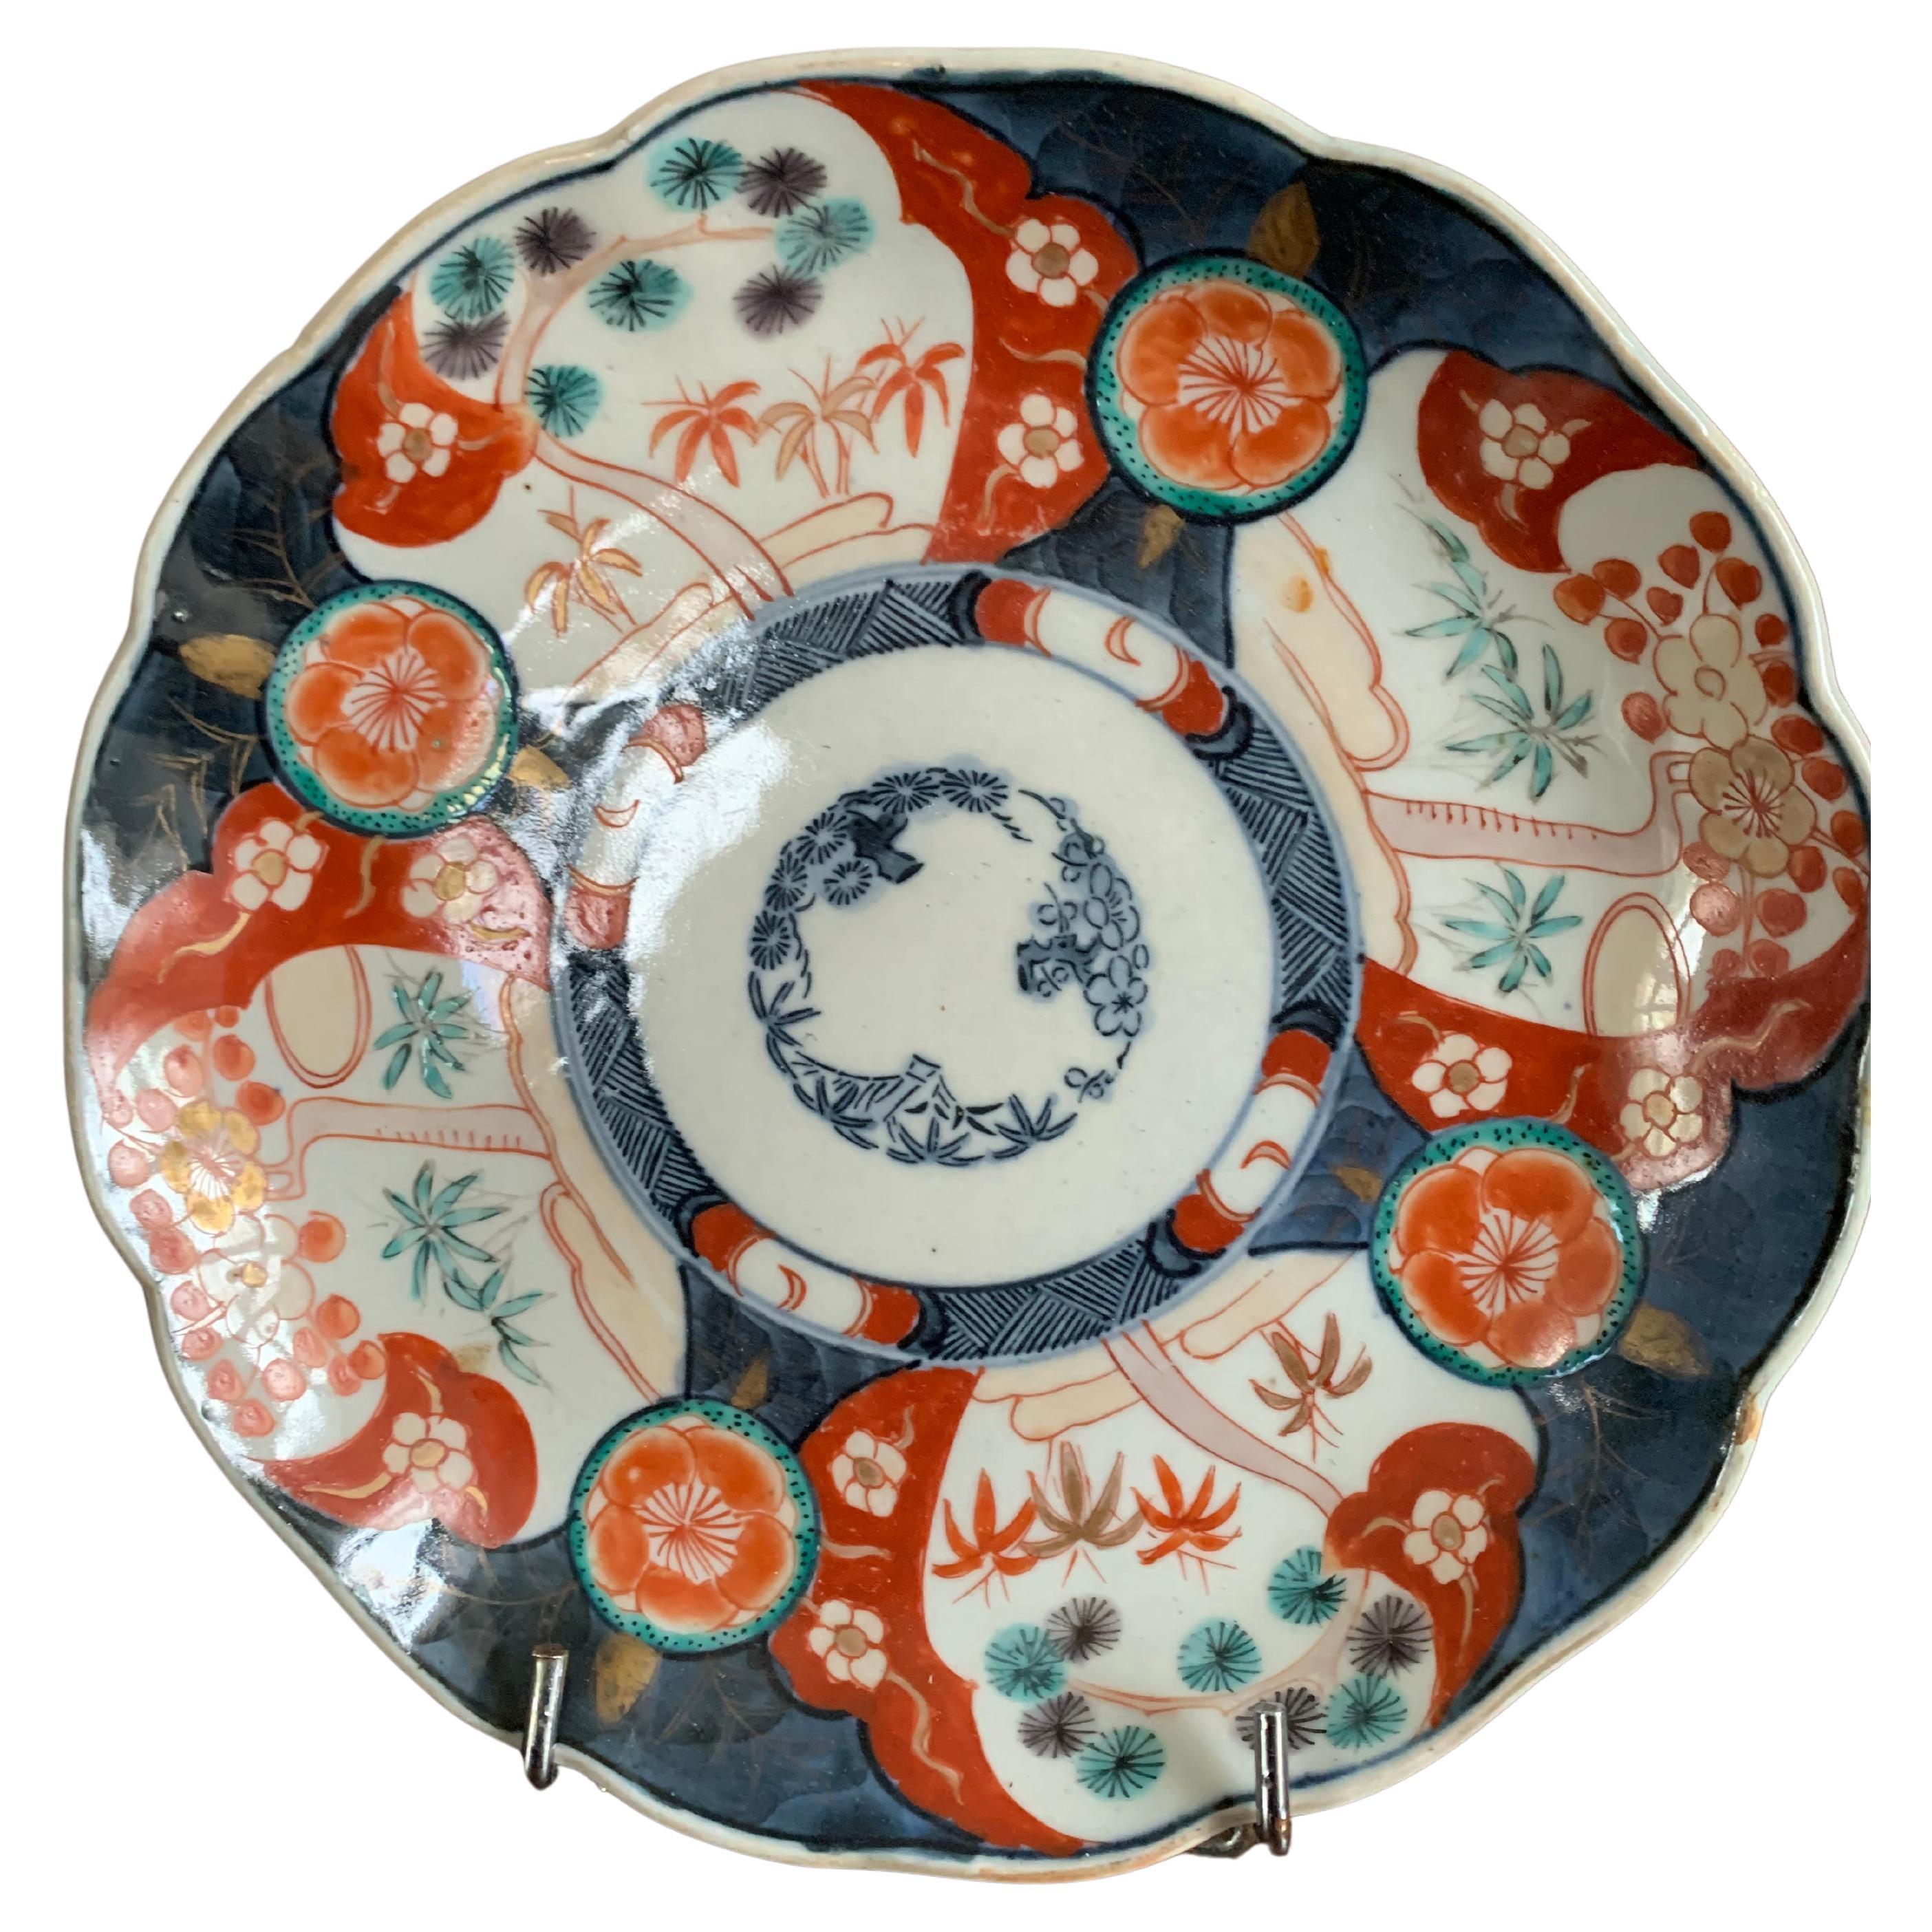 Beautiful porcelain plate with imari decoration. On this plate, the background is blue and white, with reserves in which we can observe red flowers and bamboo leaves patterns. Imari porcelain is actually a production site of Japanese porcelain on